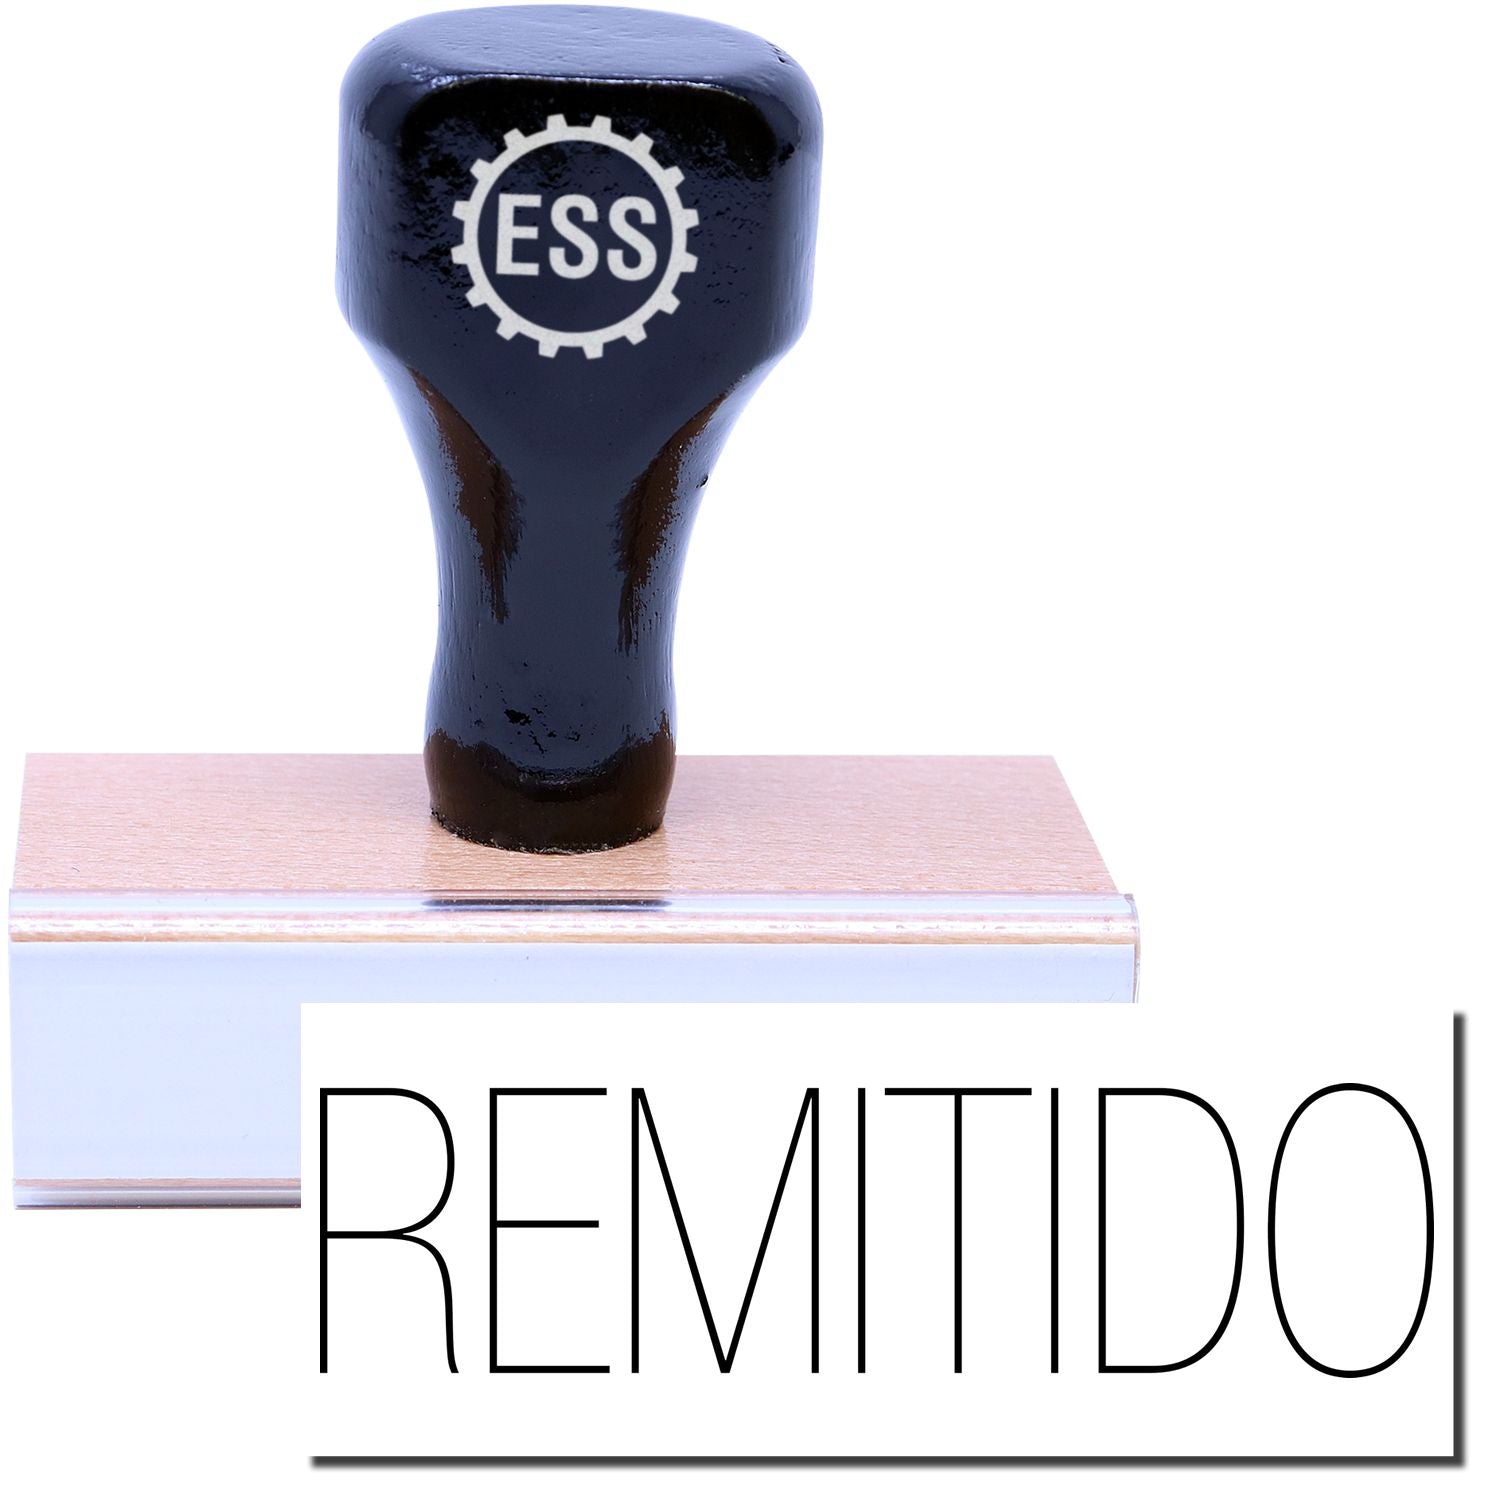 A stock office rubber stamp with a stamped image showing how the text "REMITIDO" in a large font is displayed after stamping.